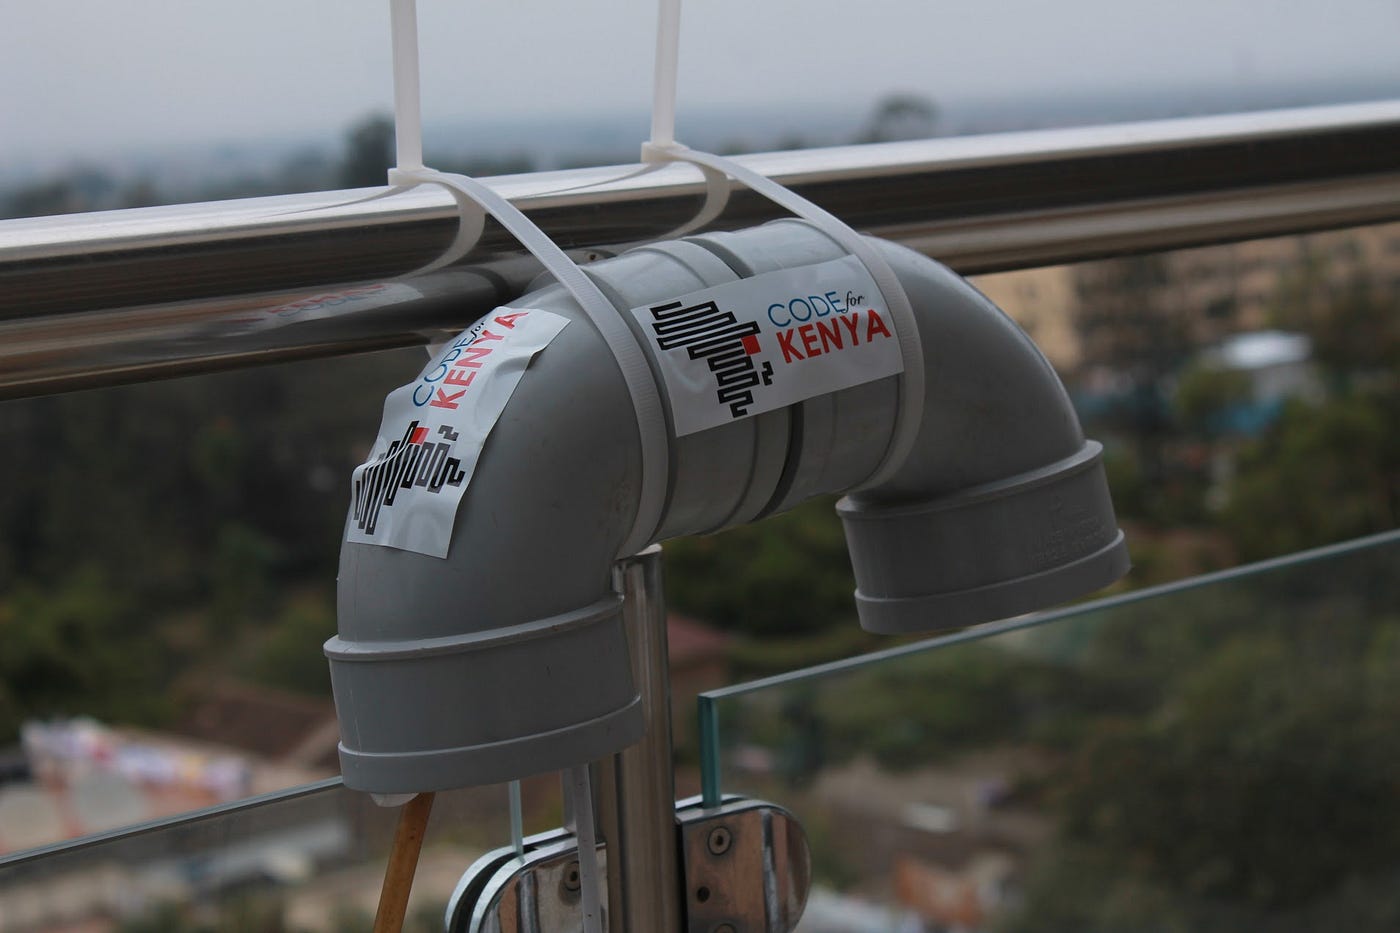 An air quality sensor outdoors on the railing of a building. The Code for Kenya logo is visible on the sensor.